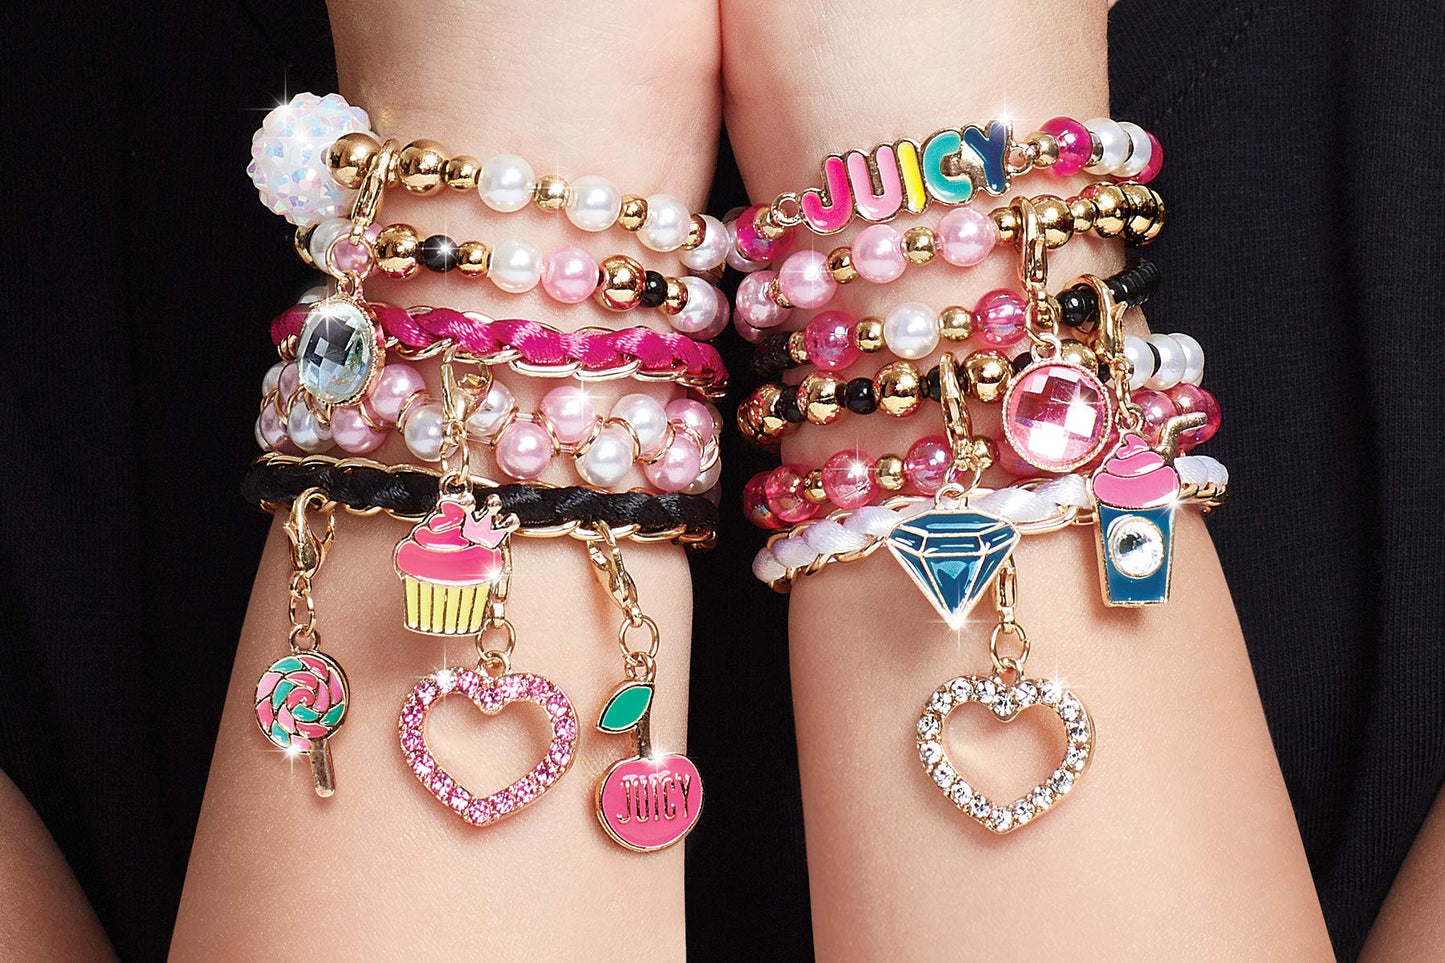 Make it Real - Juicy Couture Pink and Precious Bracelets - DIY Charm Bracelet Kit with Beads for Tween Jewelry Making - Jewelry Making Kit for Girls